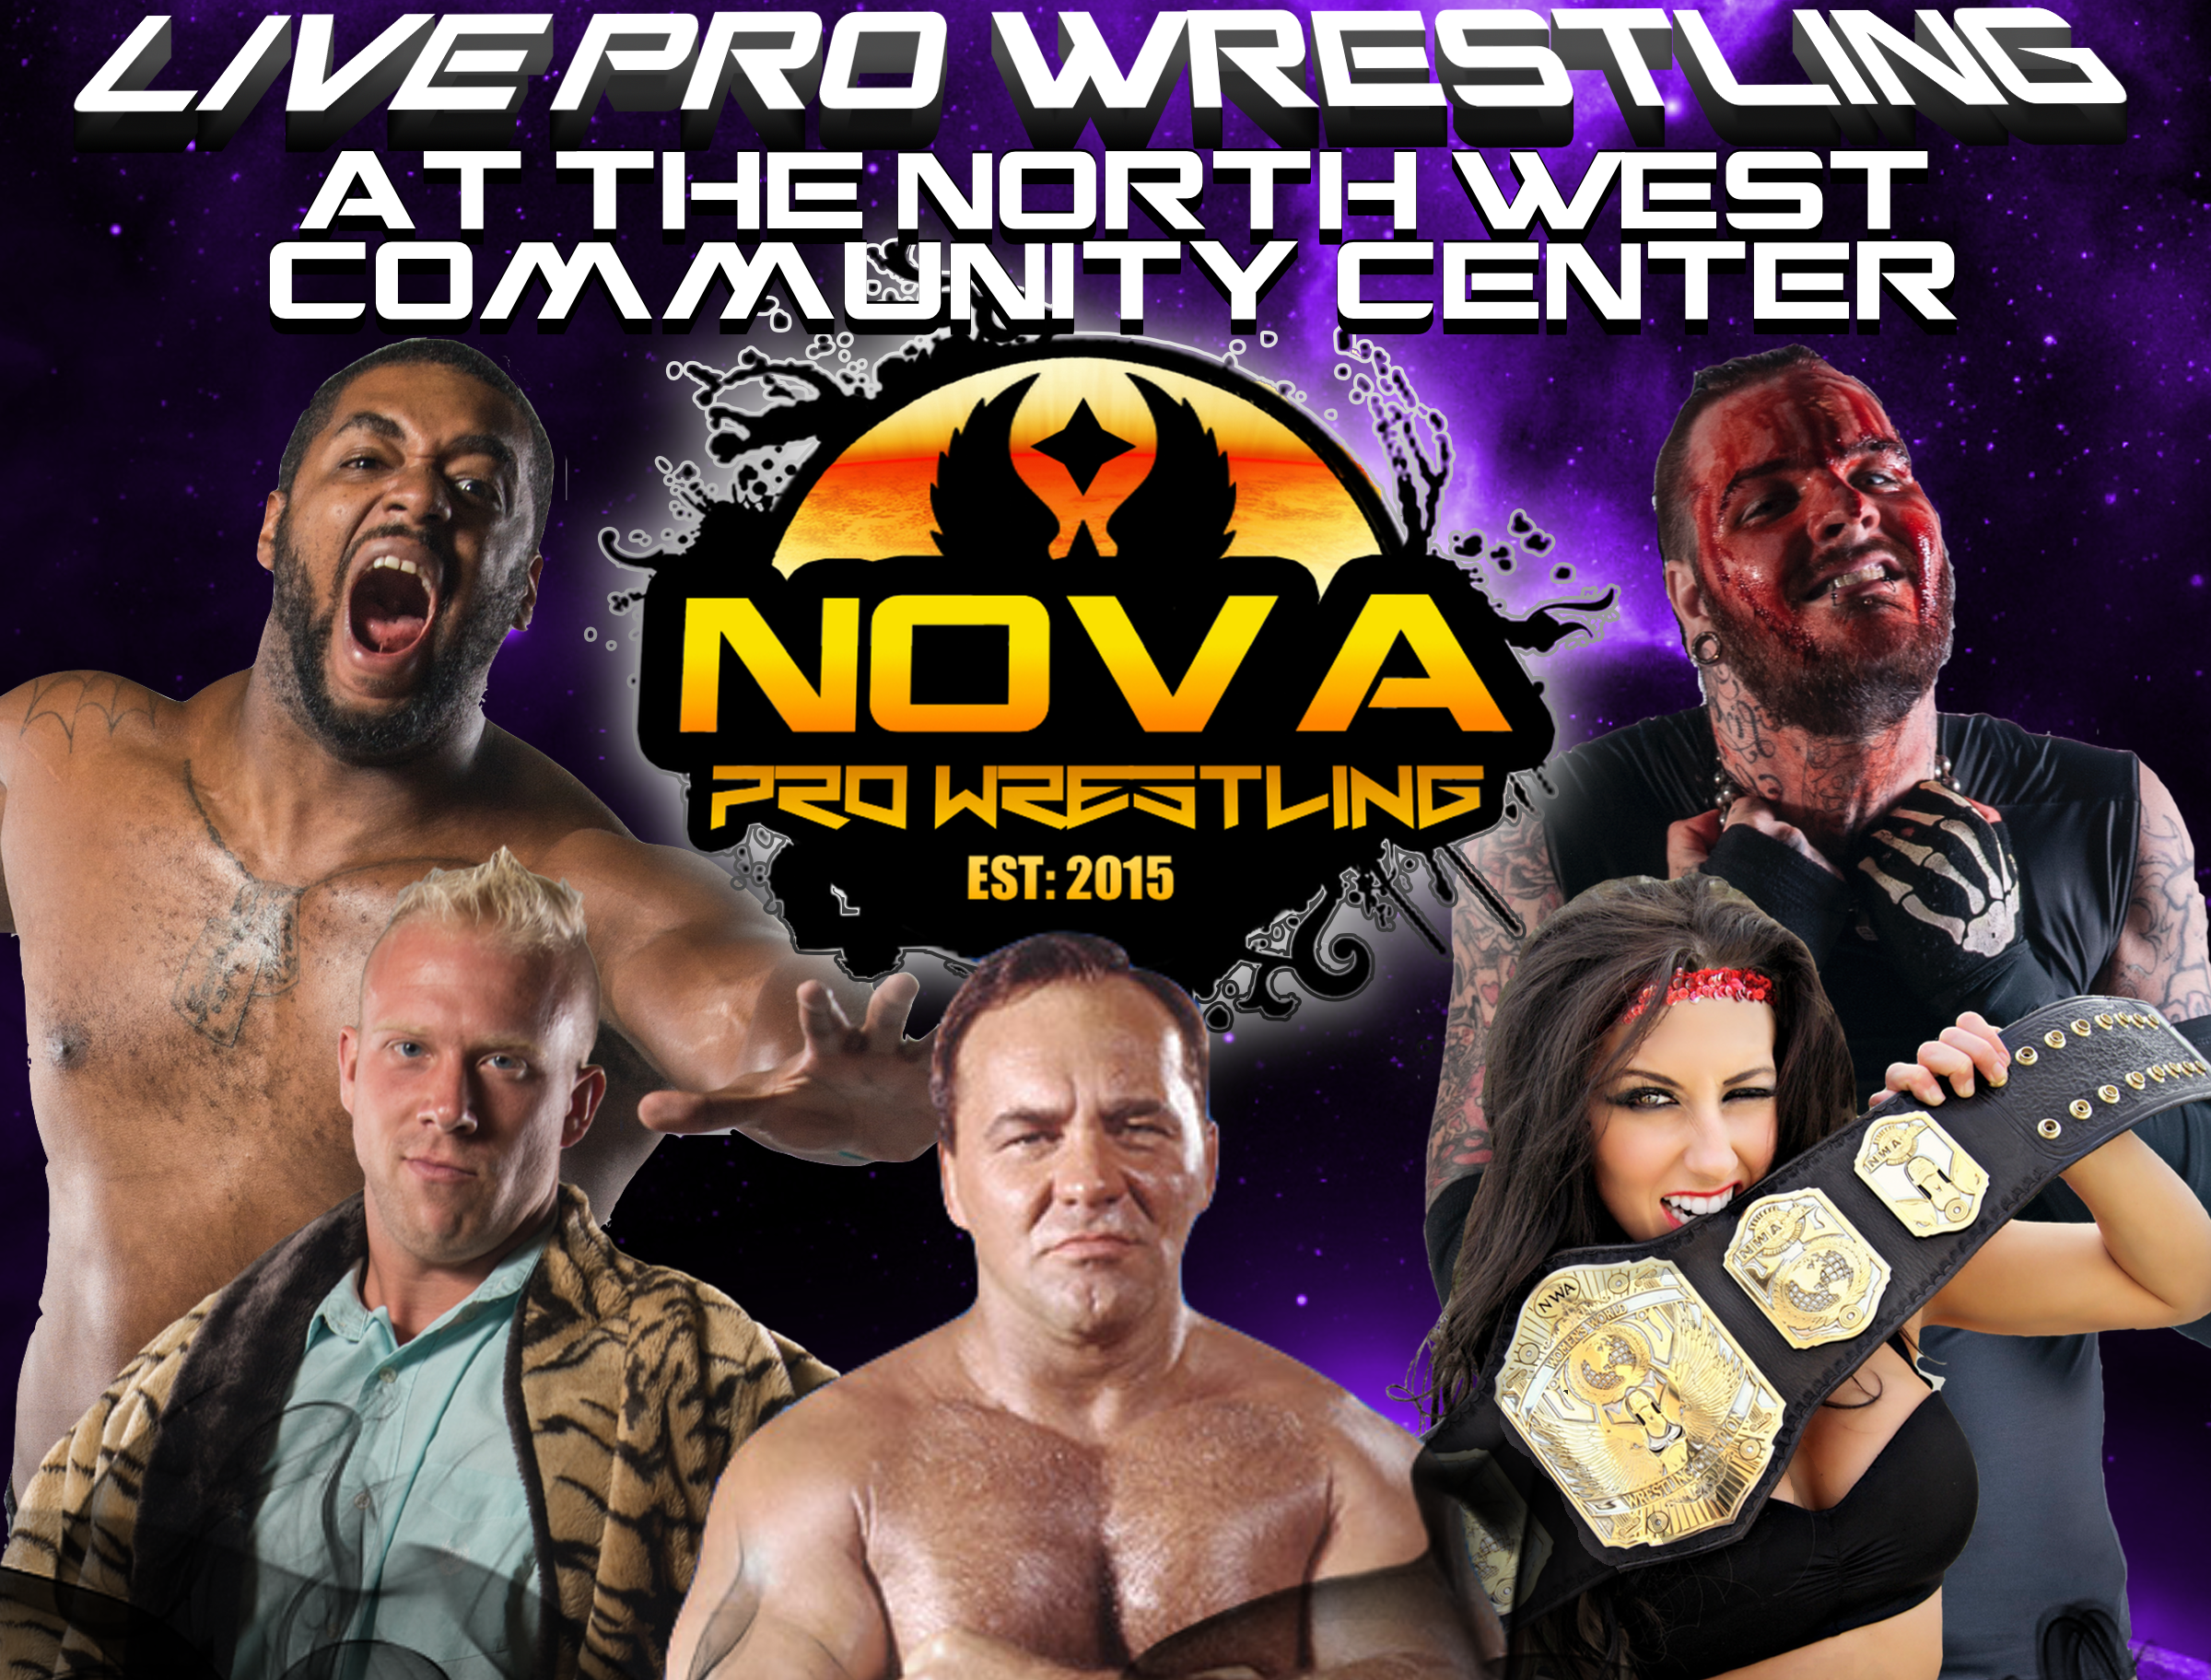 New wrestling promotion coming to Florida